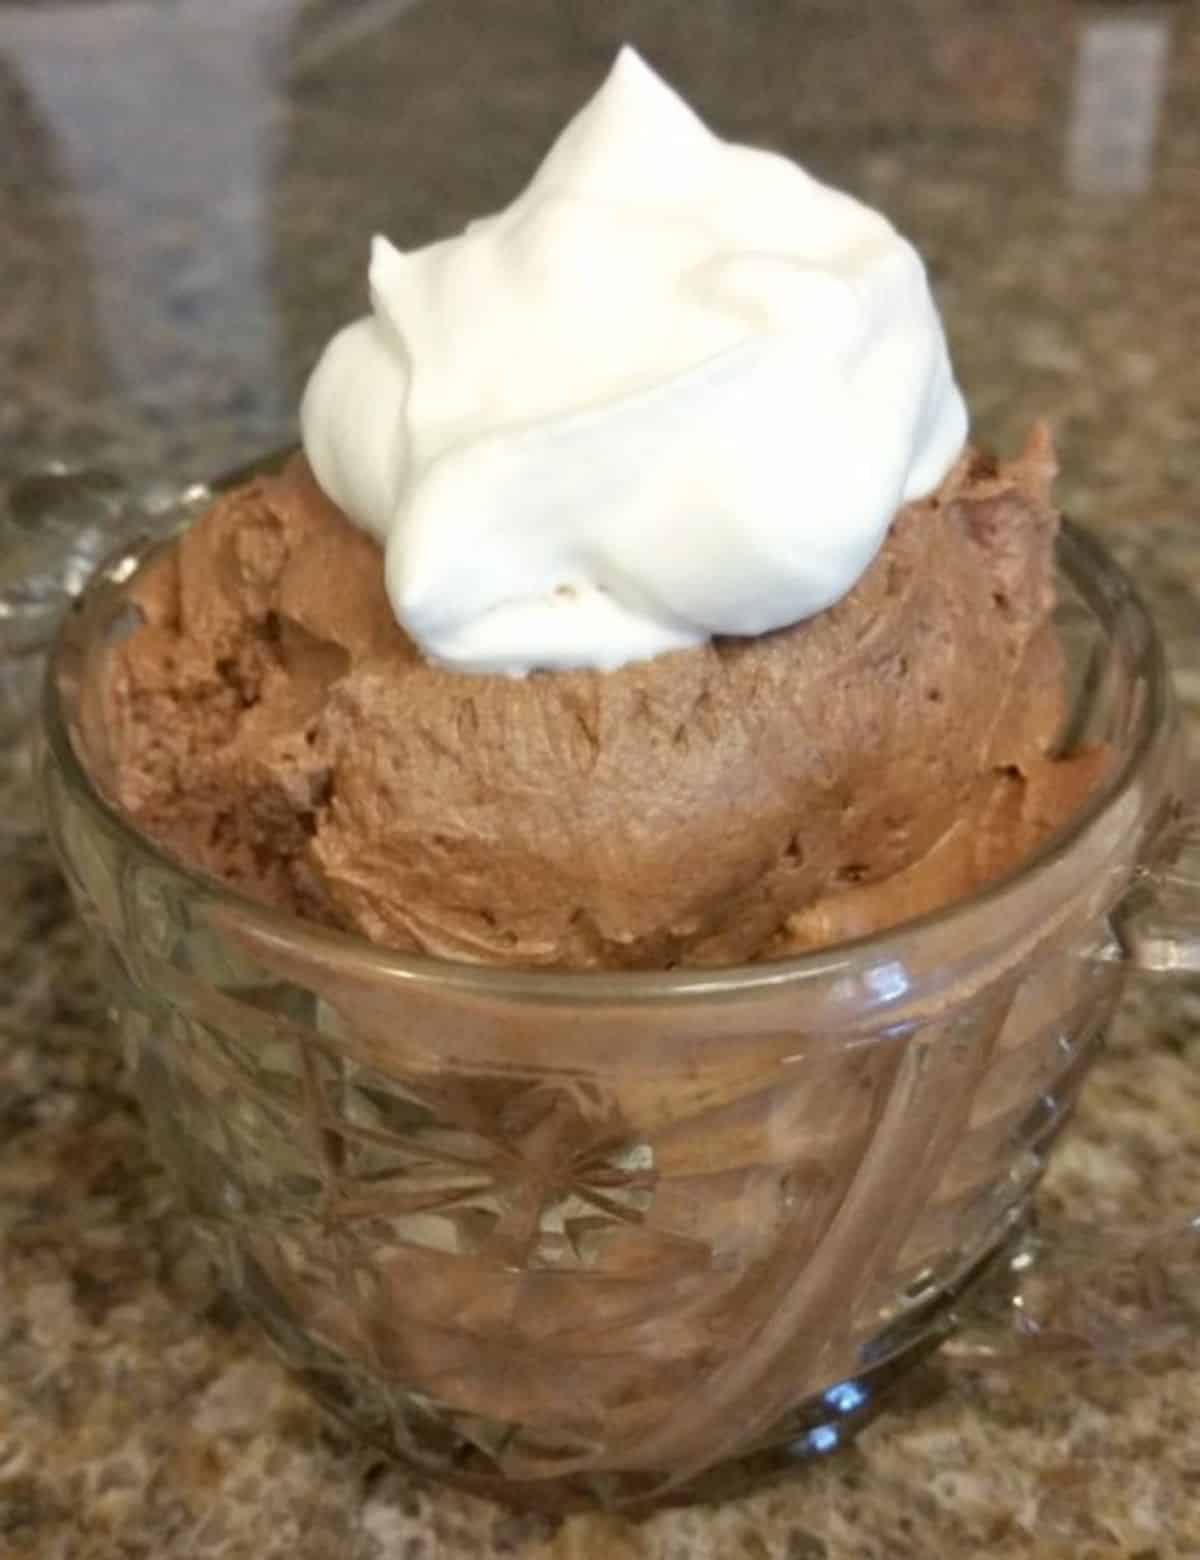 A delicious Healthy Chocolate Mousse in a glass bowl.